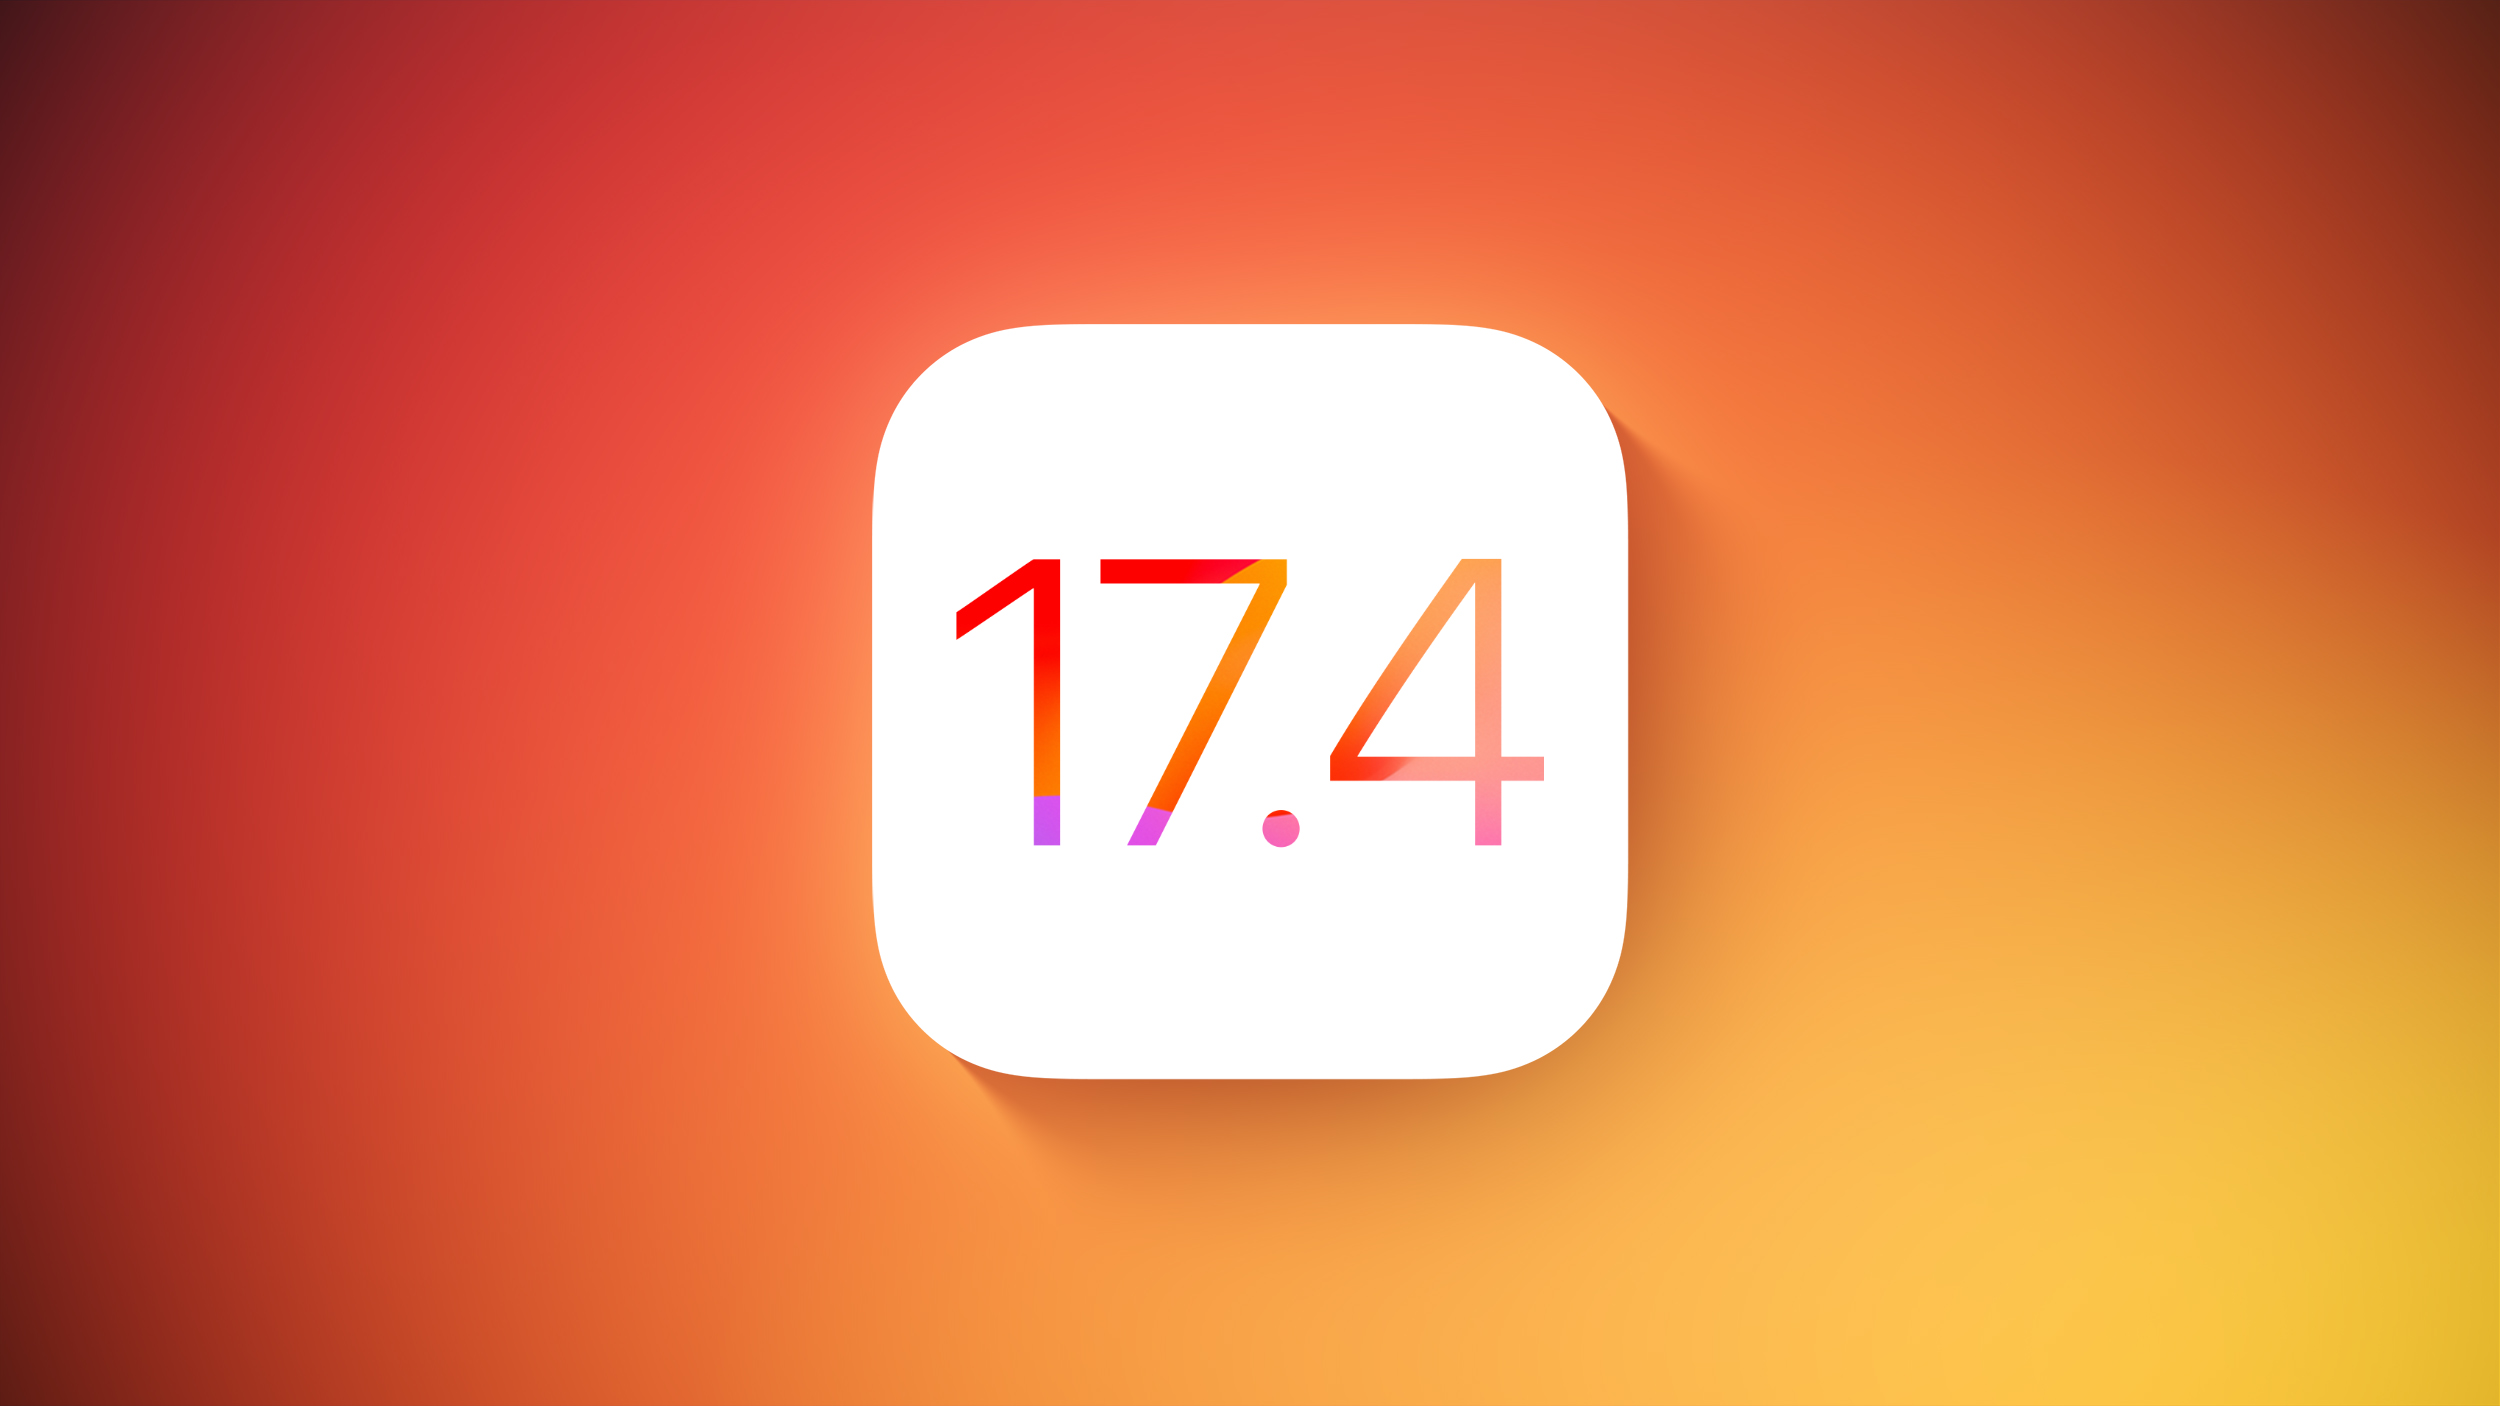 Apple Seeds Release Candidate Versions of iOS 17.4 and iPadOS 17.4 to Developers [Update: Public Beta Available]